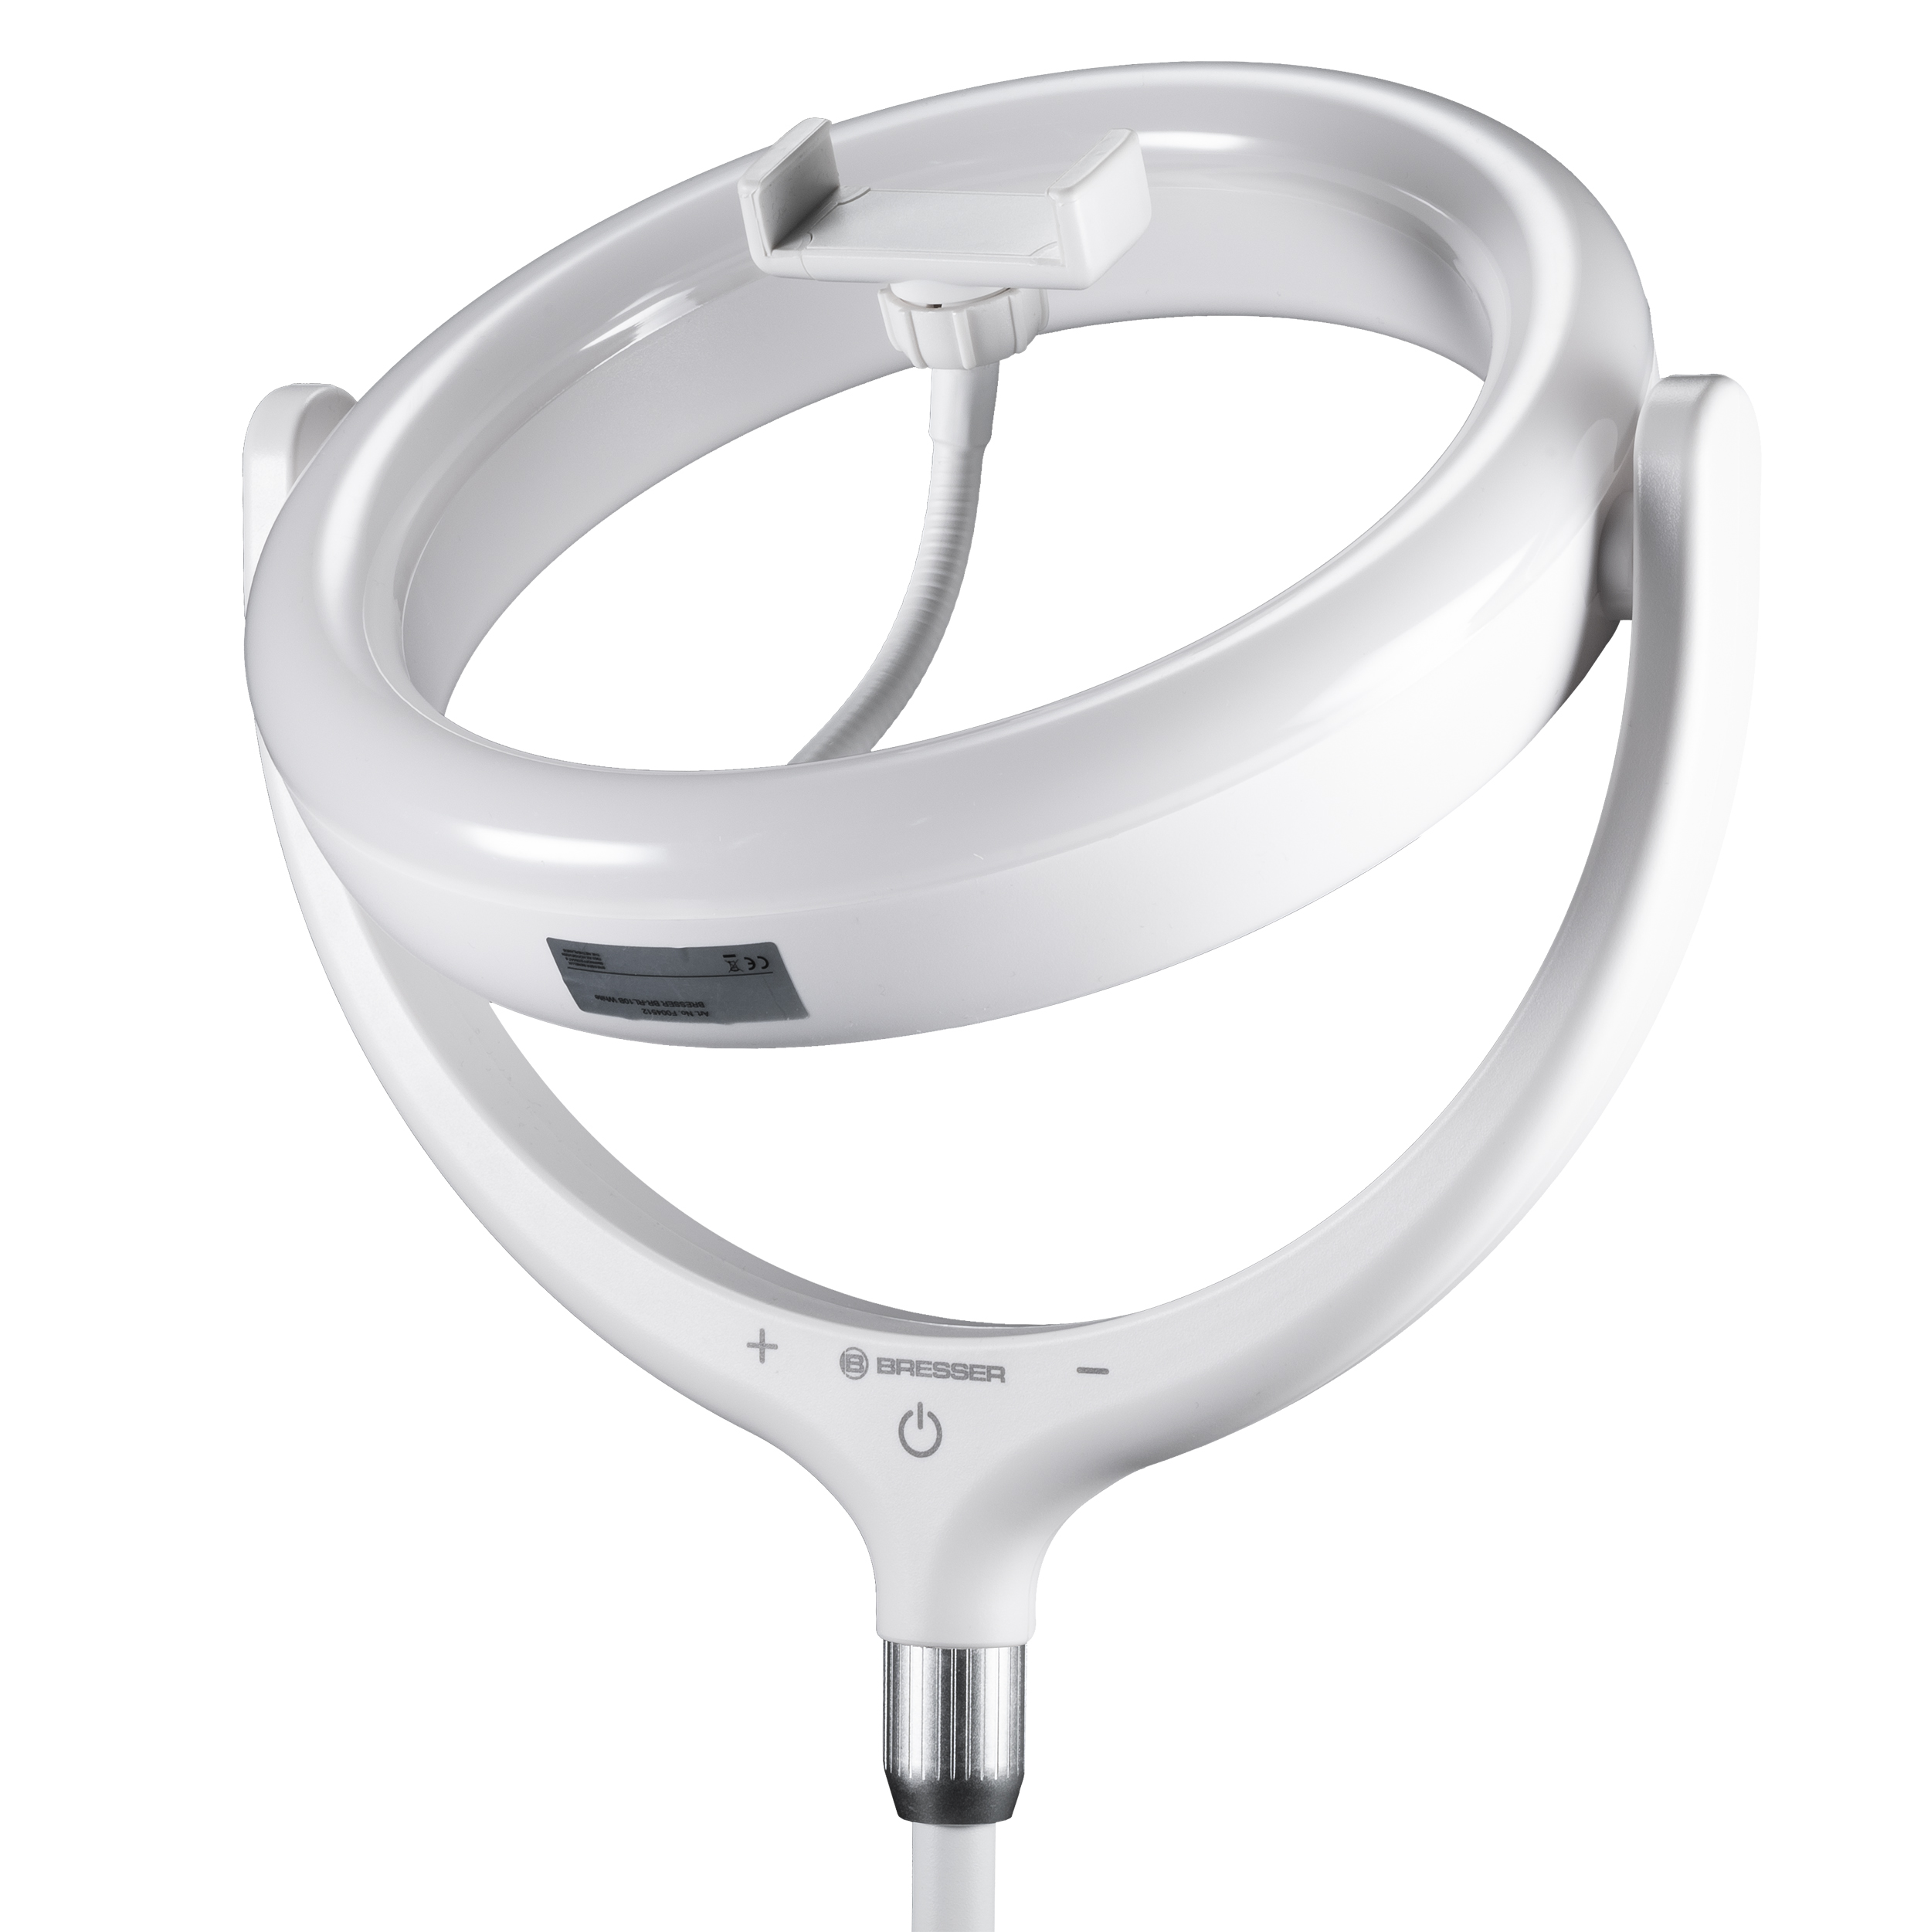 BRESSER BR-RL 10B LED Ringlight with stand and USB connection (Refurbished)